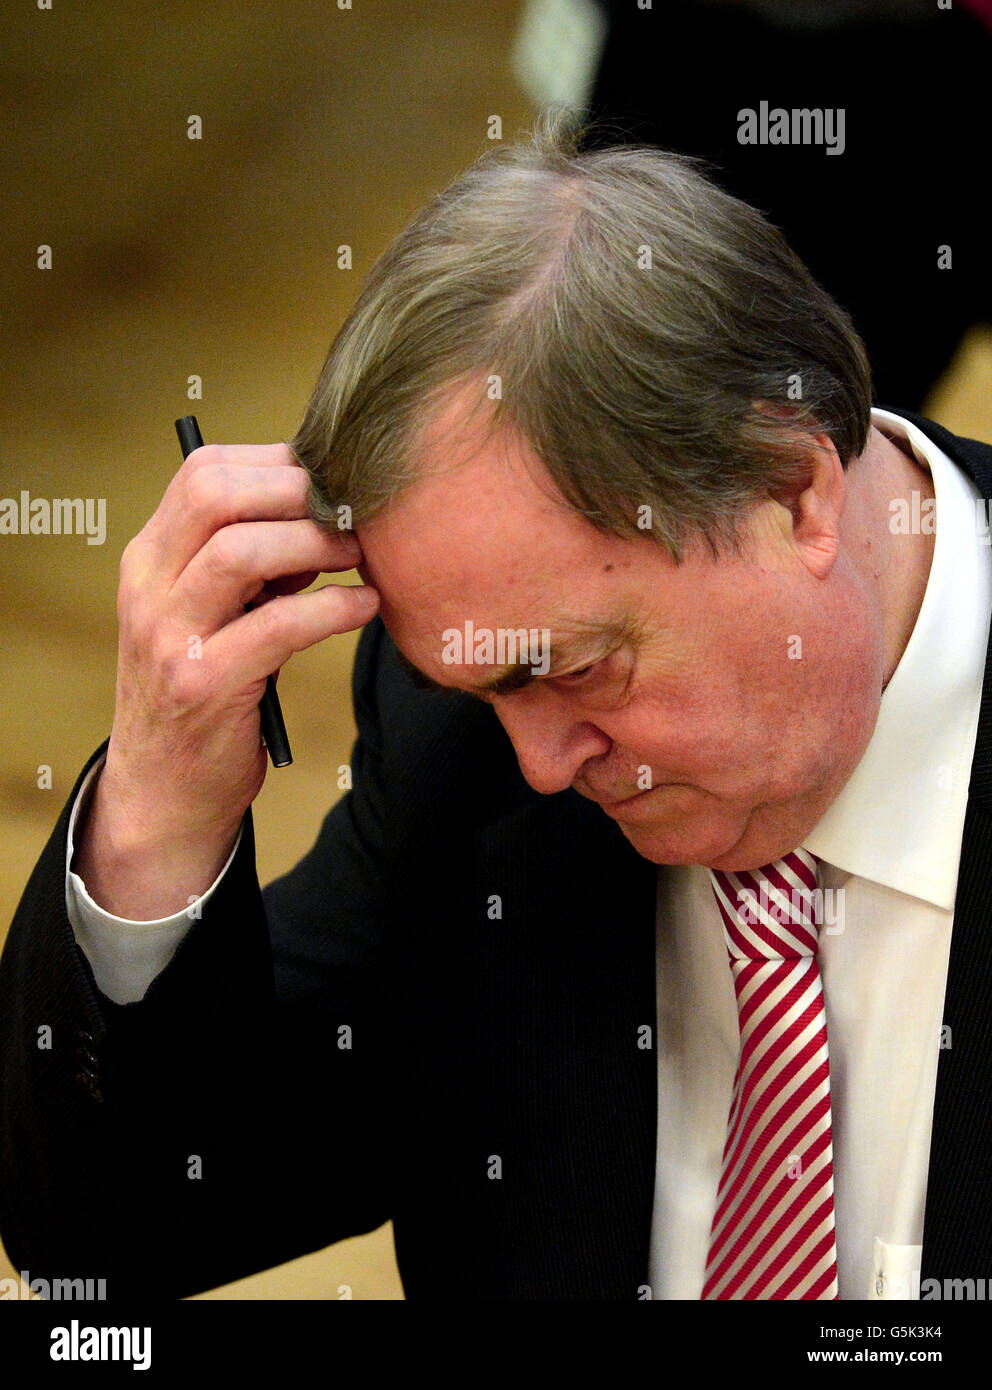 Lord Prescott reacts as during the vote count for the Police and Crime Commissioner in the Humberside Police Area in The Bridlington Spa following polling yesterday. Stock Photo